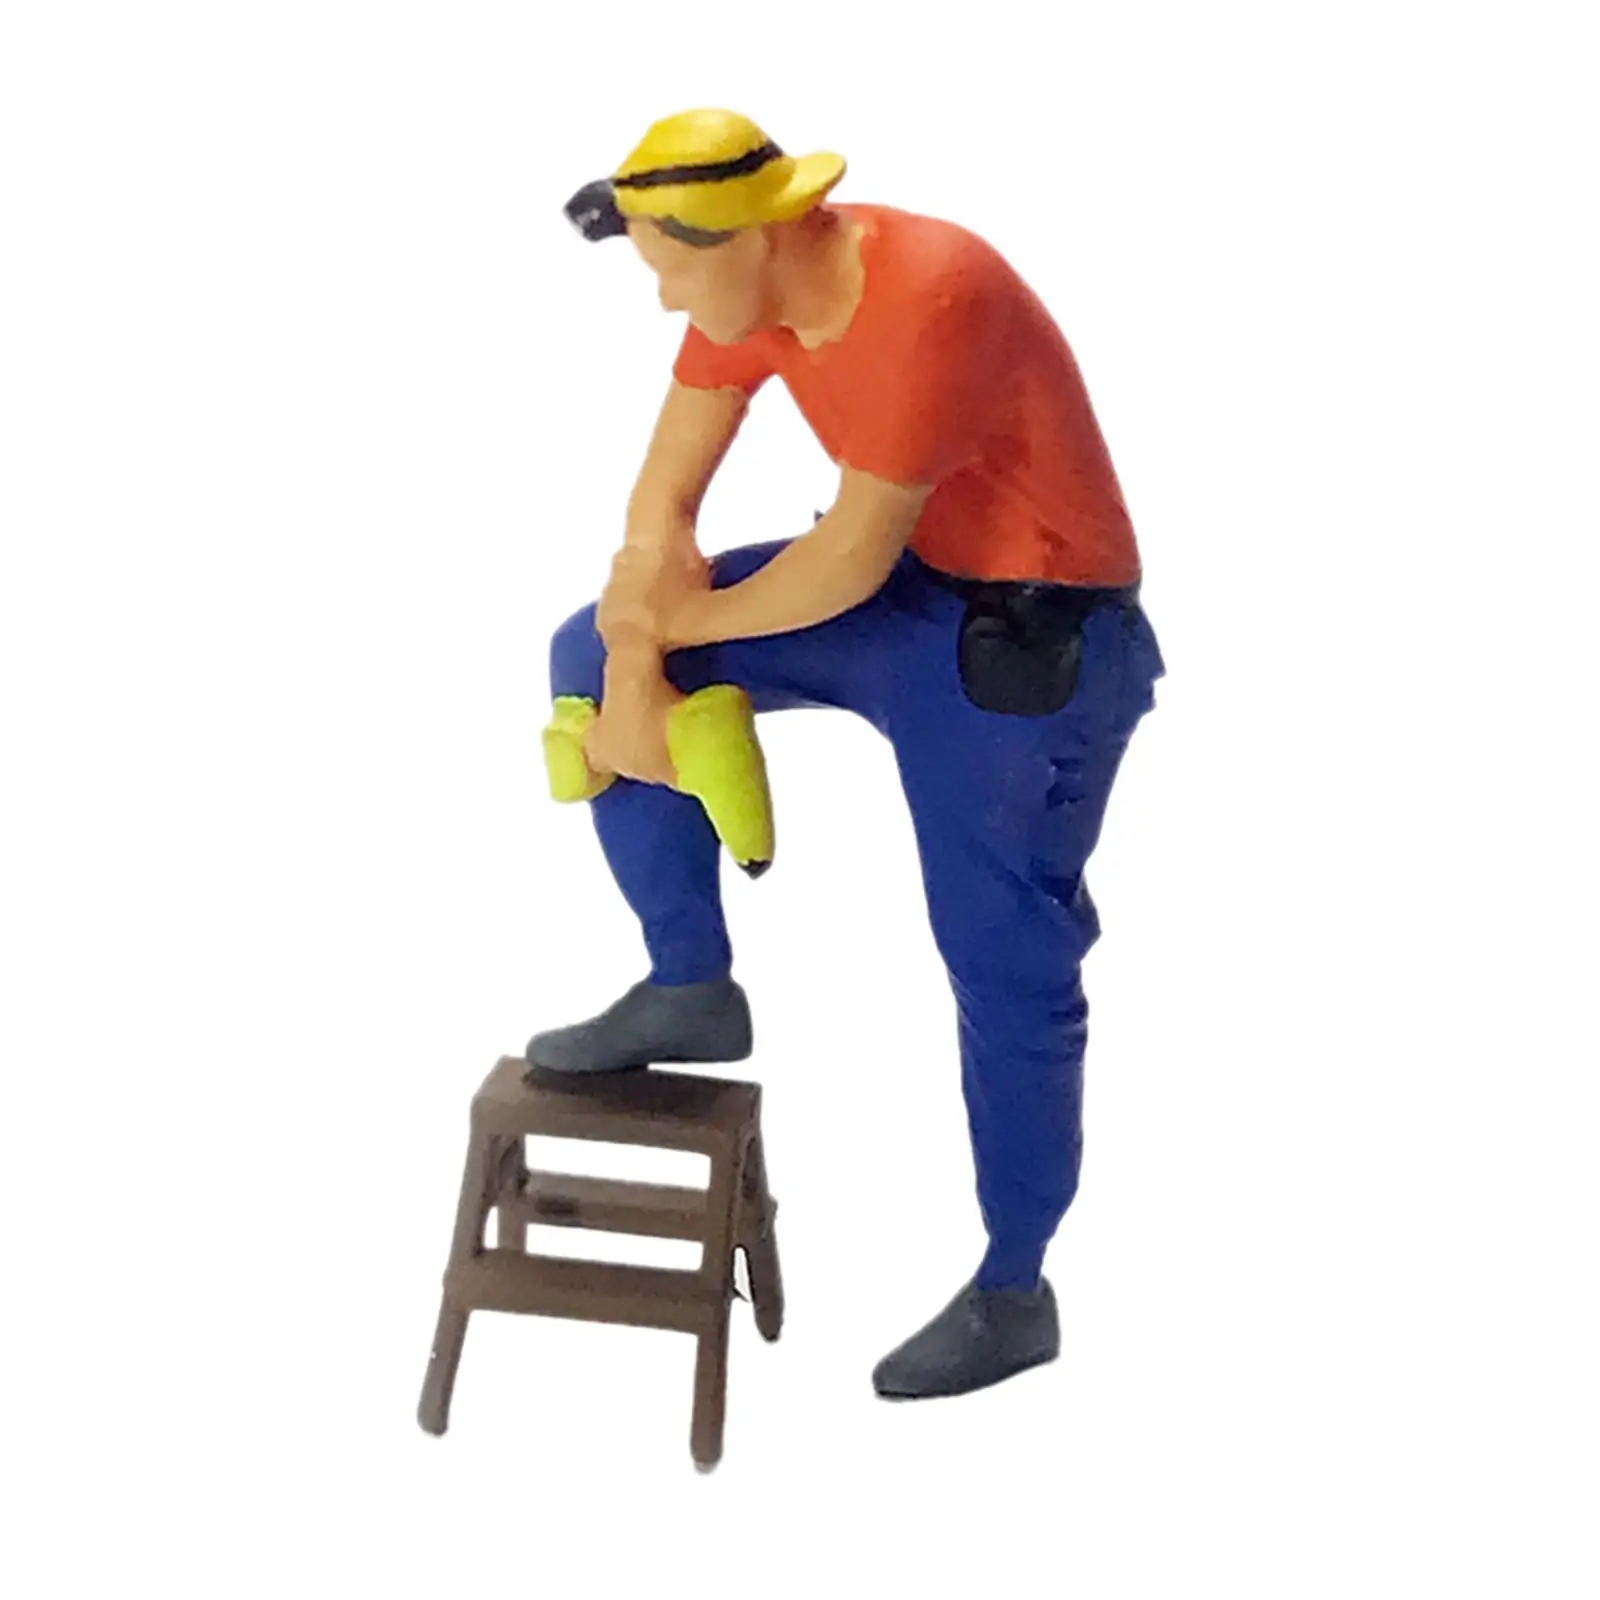 Hand Painted 1/87 People Figure Collectibles Scenery Model Train Scenes Repairman Character